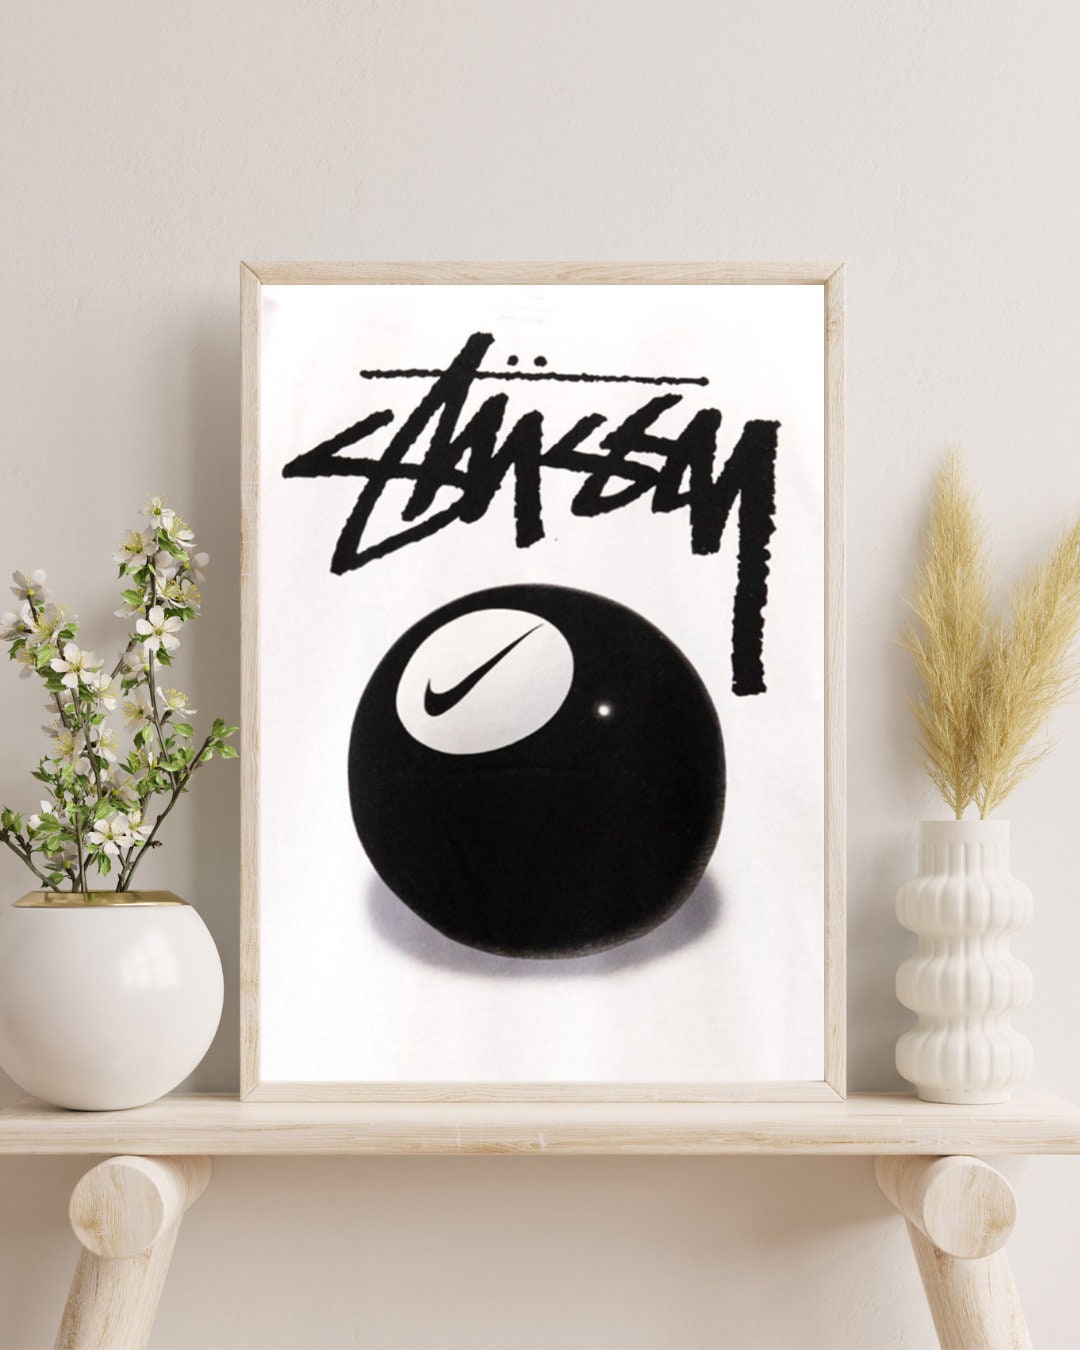 Vintage Stussy Surf Poster, International Stussy Tribe, Jeff Booth Poster,  Room Decor, College Dorm, Wall Art Paintings Canvas Wall Decor Home Decor